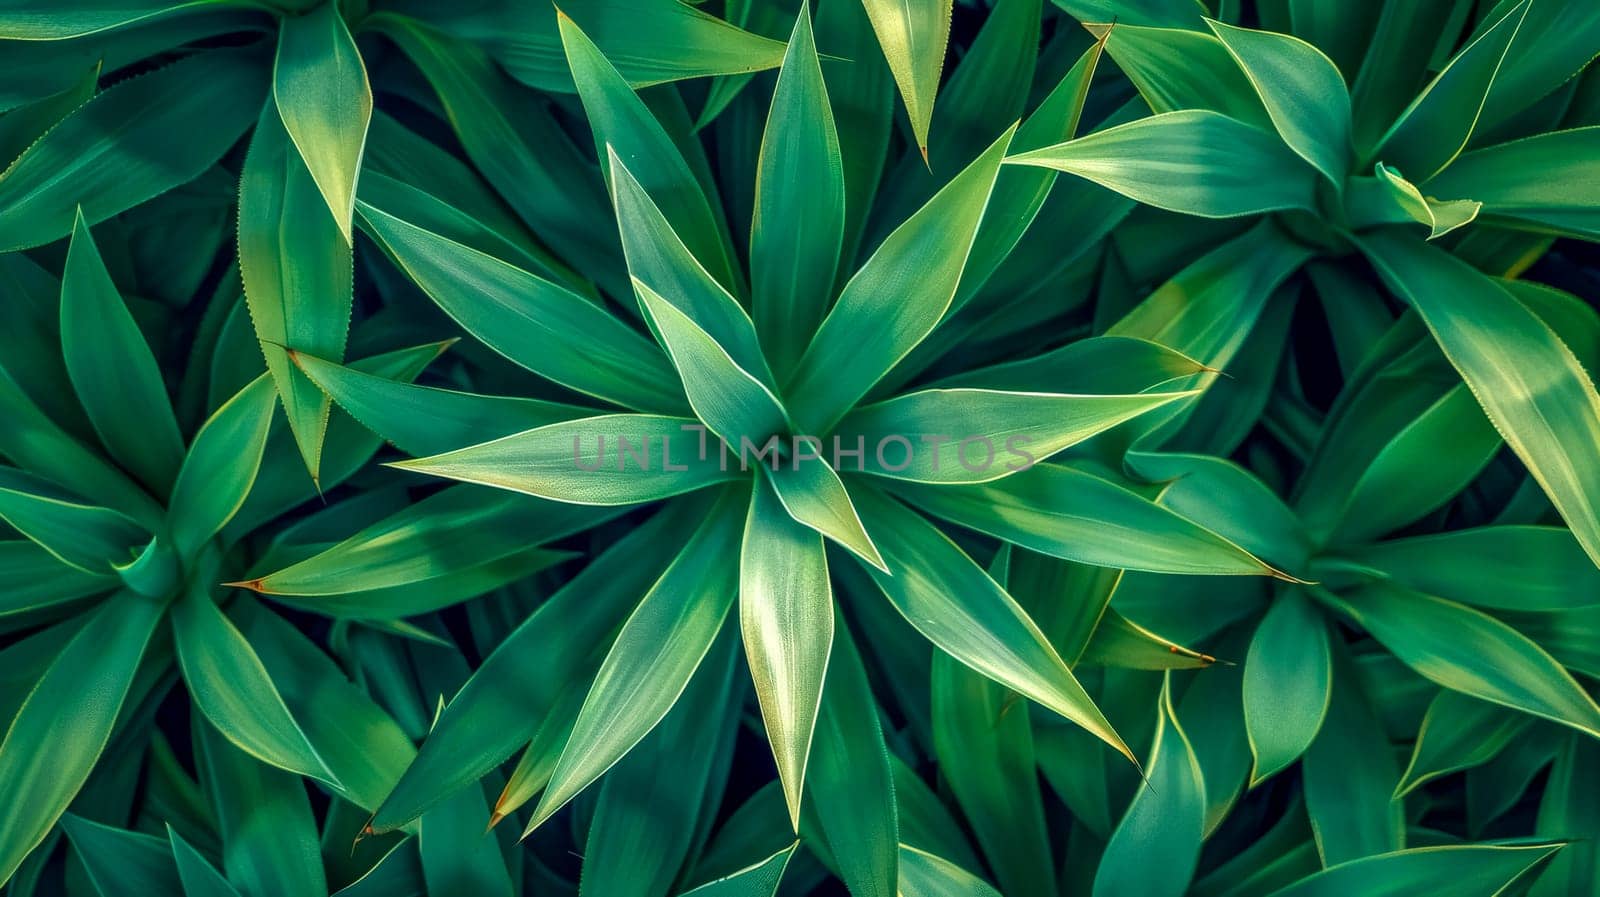 Top view of vibrant green leaves creating a natural pattern by Edophoto